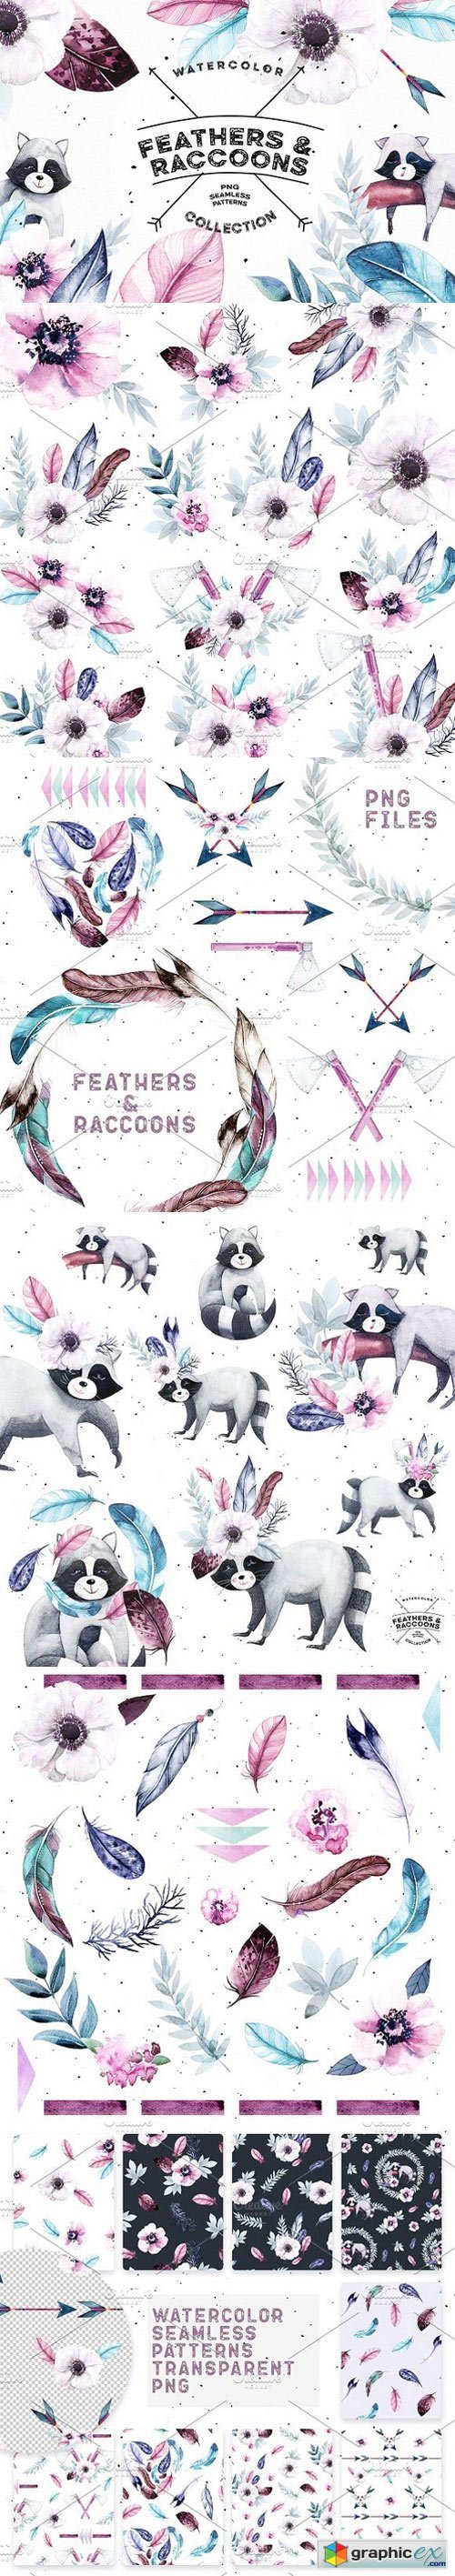 Watercolor Feathers & Raccoons